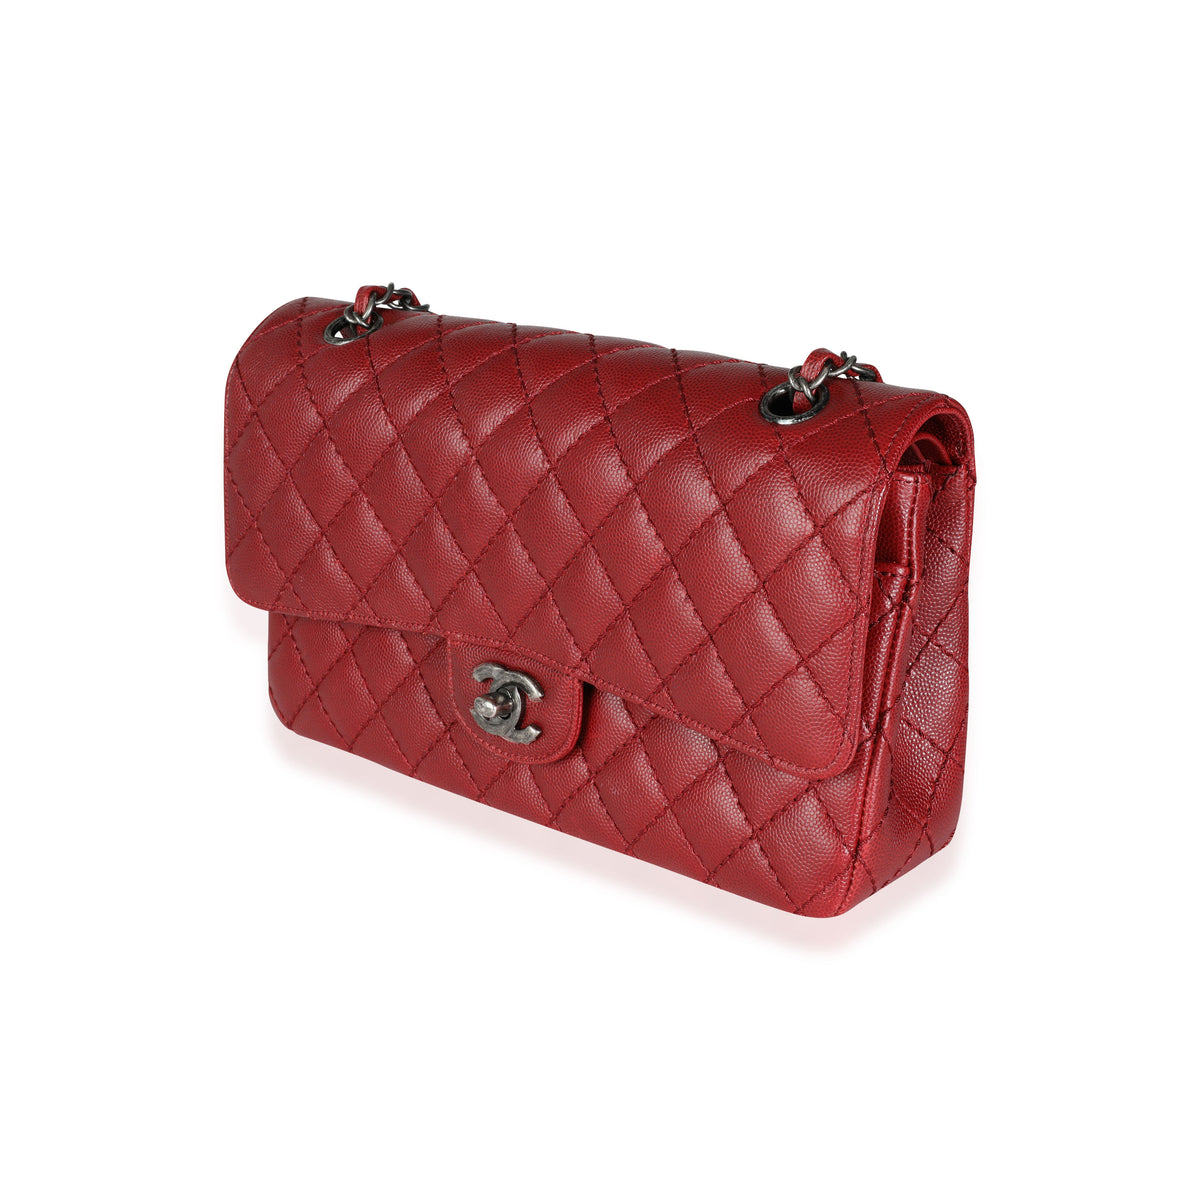 Chanel Dark Red Quilted Caviar Medium Classic Double Flap Bag, myGemma